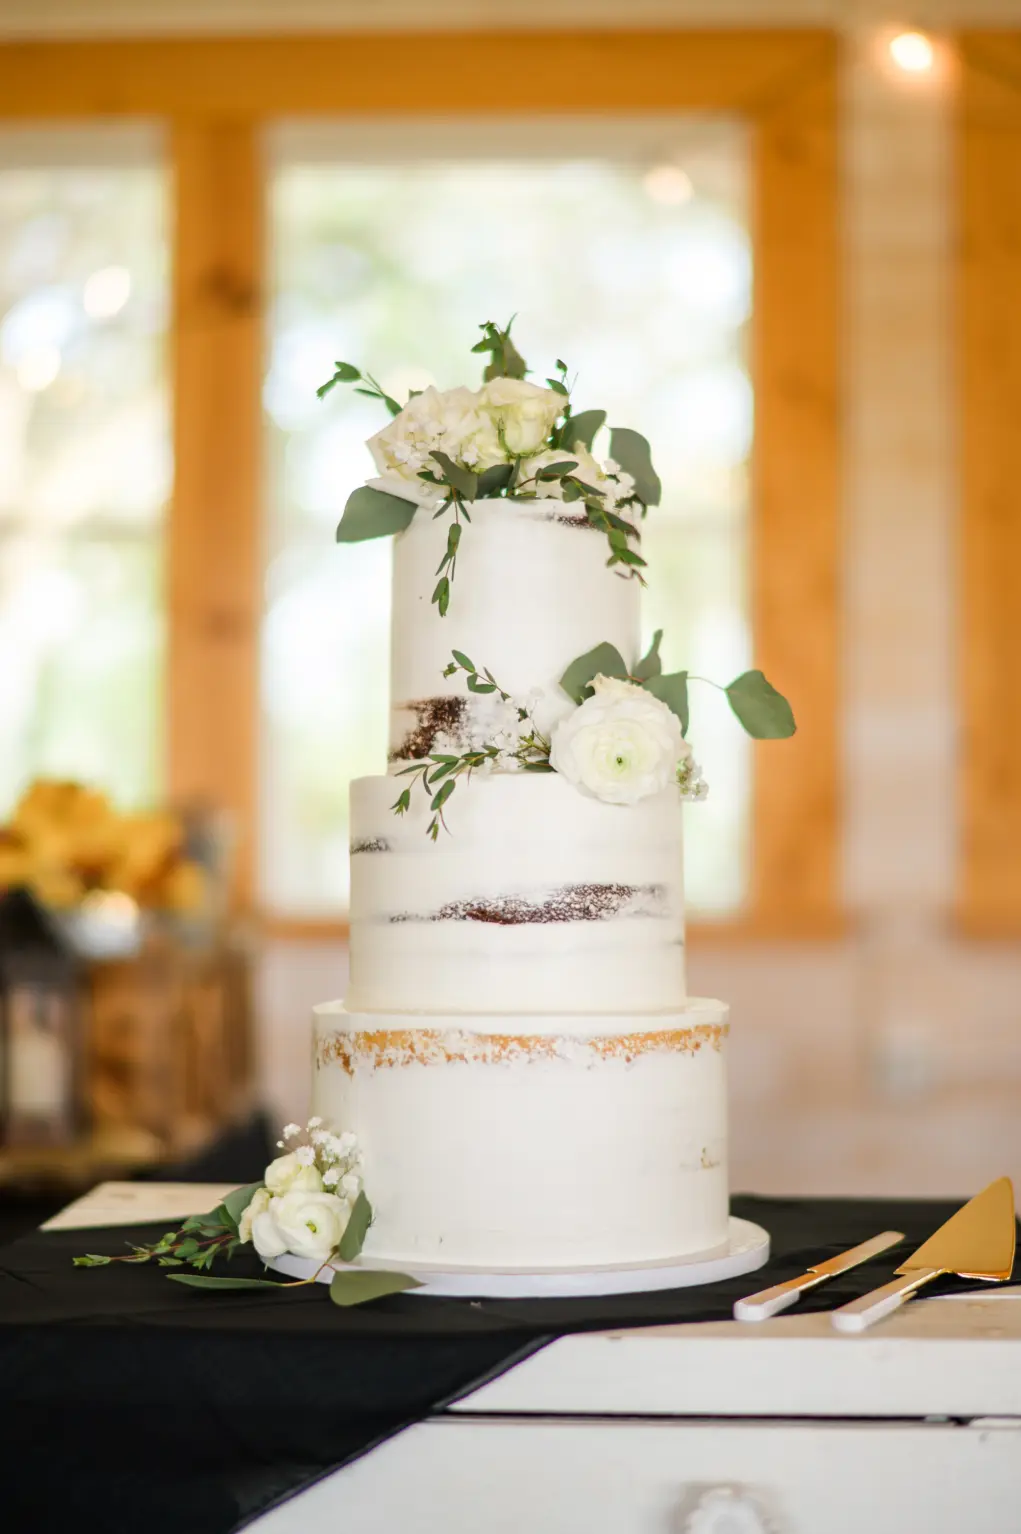 Rustic Round White Three-Tiered Semi Naked Wedding Cake with White Flowers and Greenery Accents Inspiration